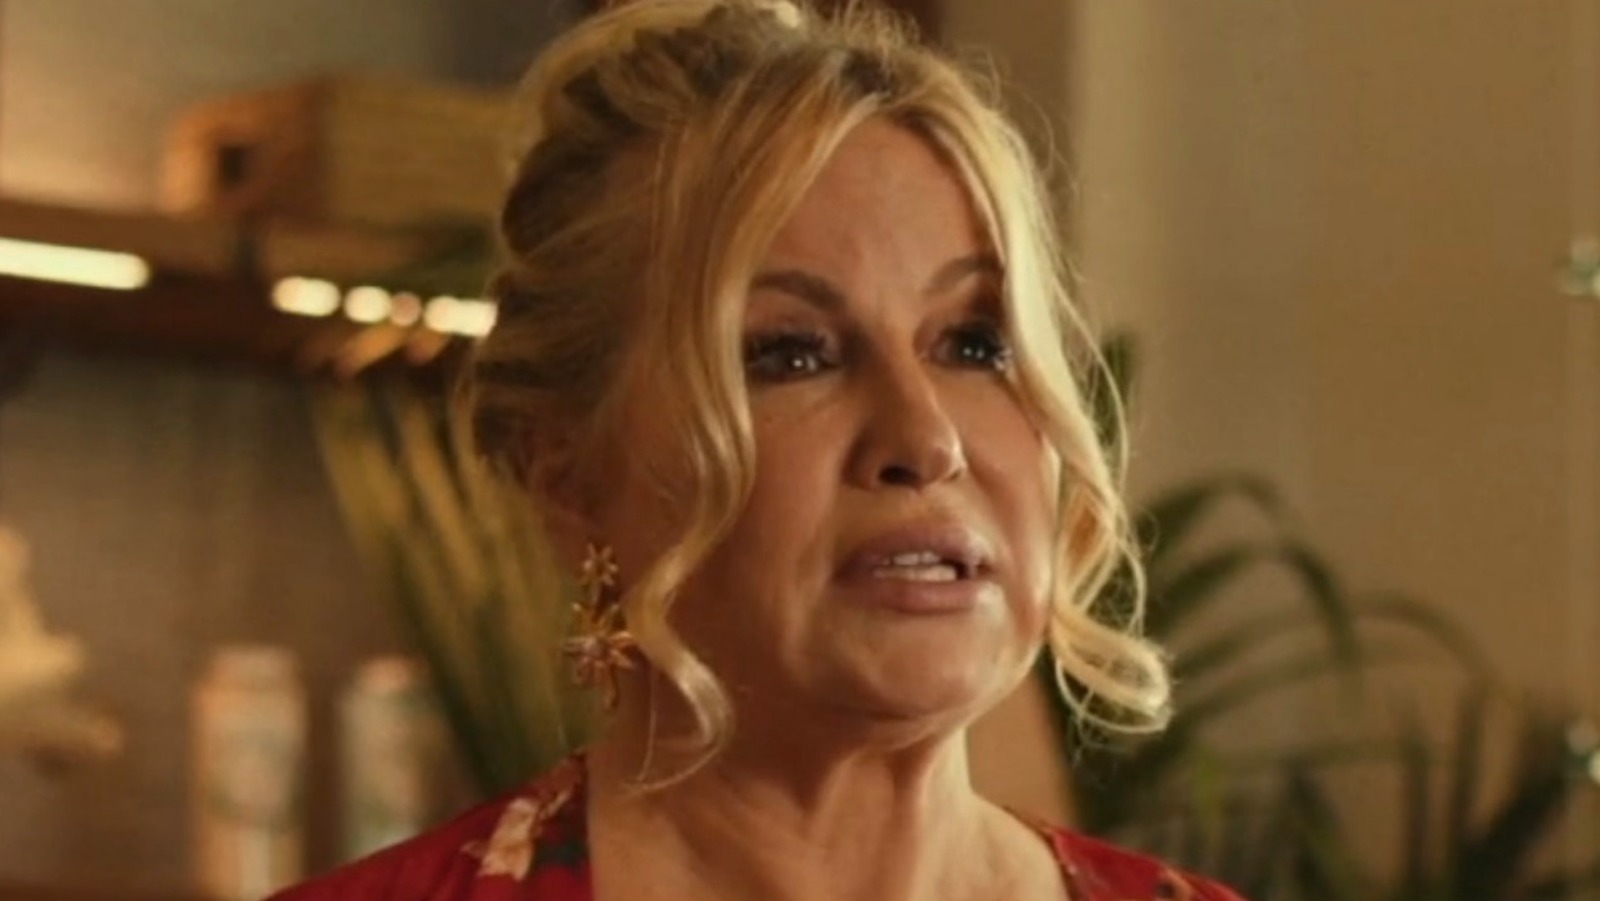 the White Lotus': Jennifer Coolidge's Character Tanya Must Die: Opinion